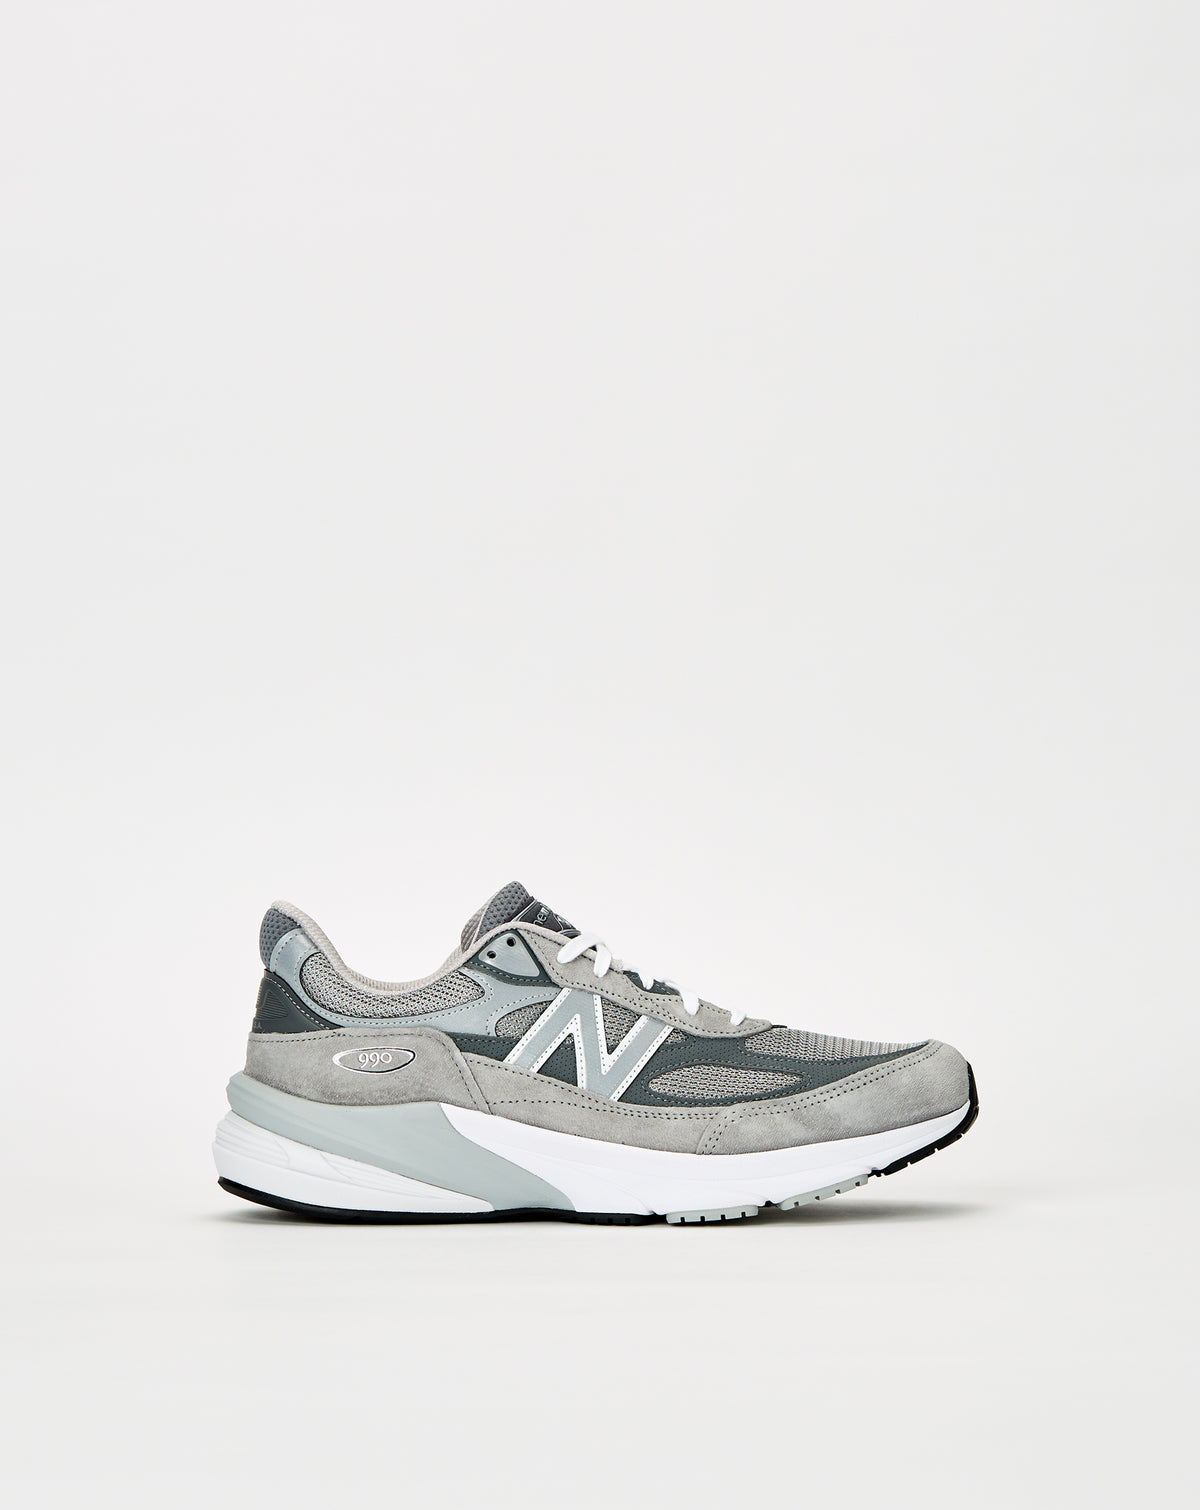 New Balance Made in USA 990v6 - Rule of Next Footwear